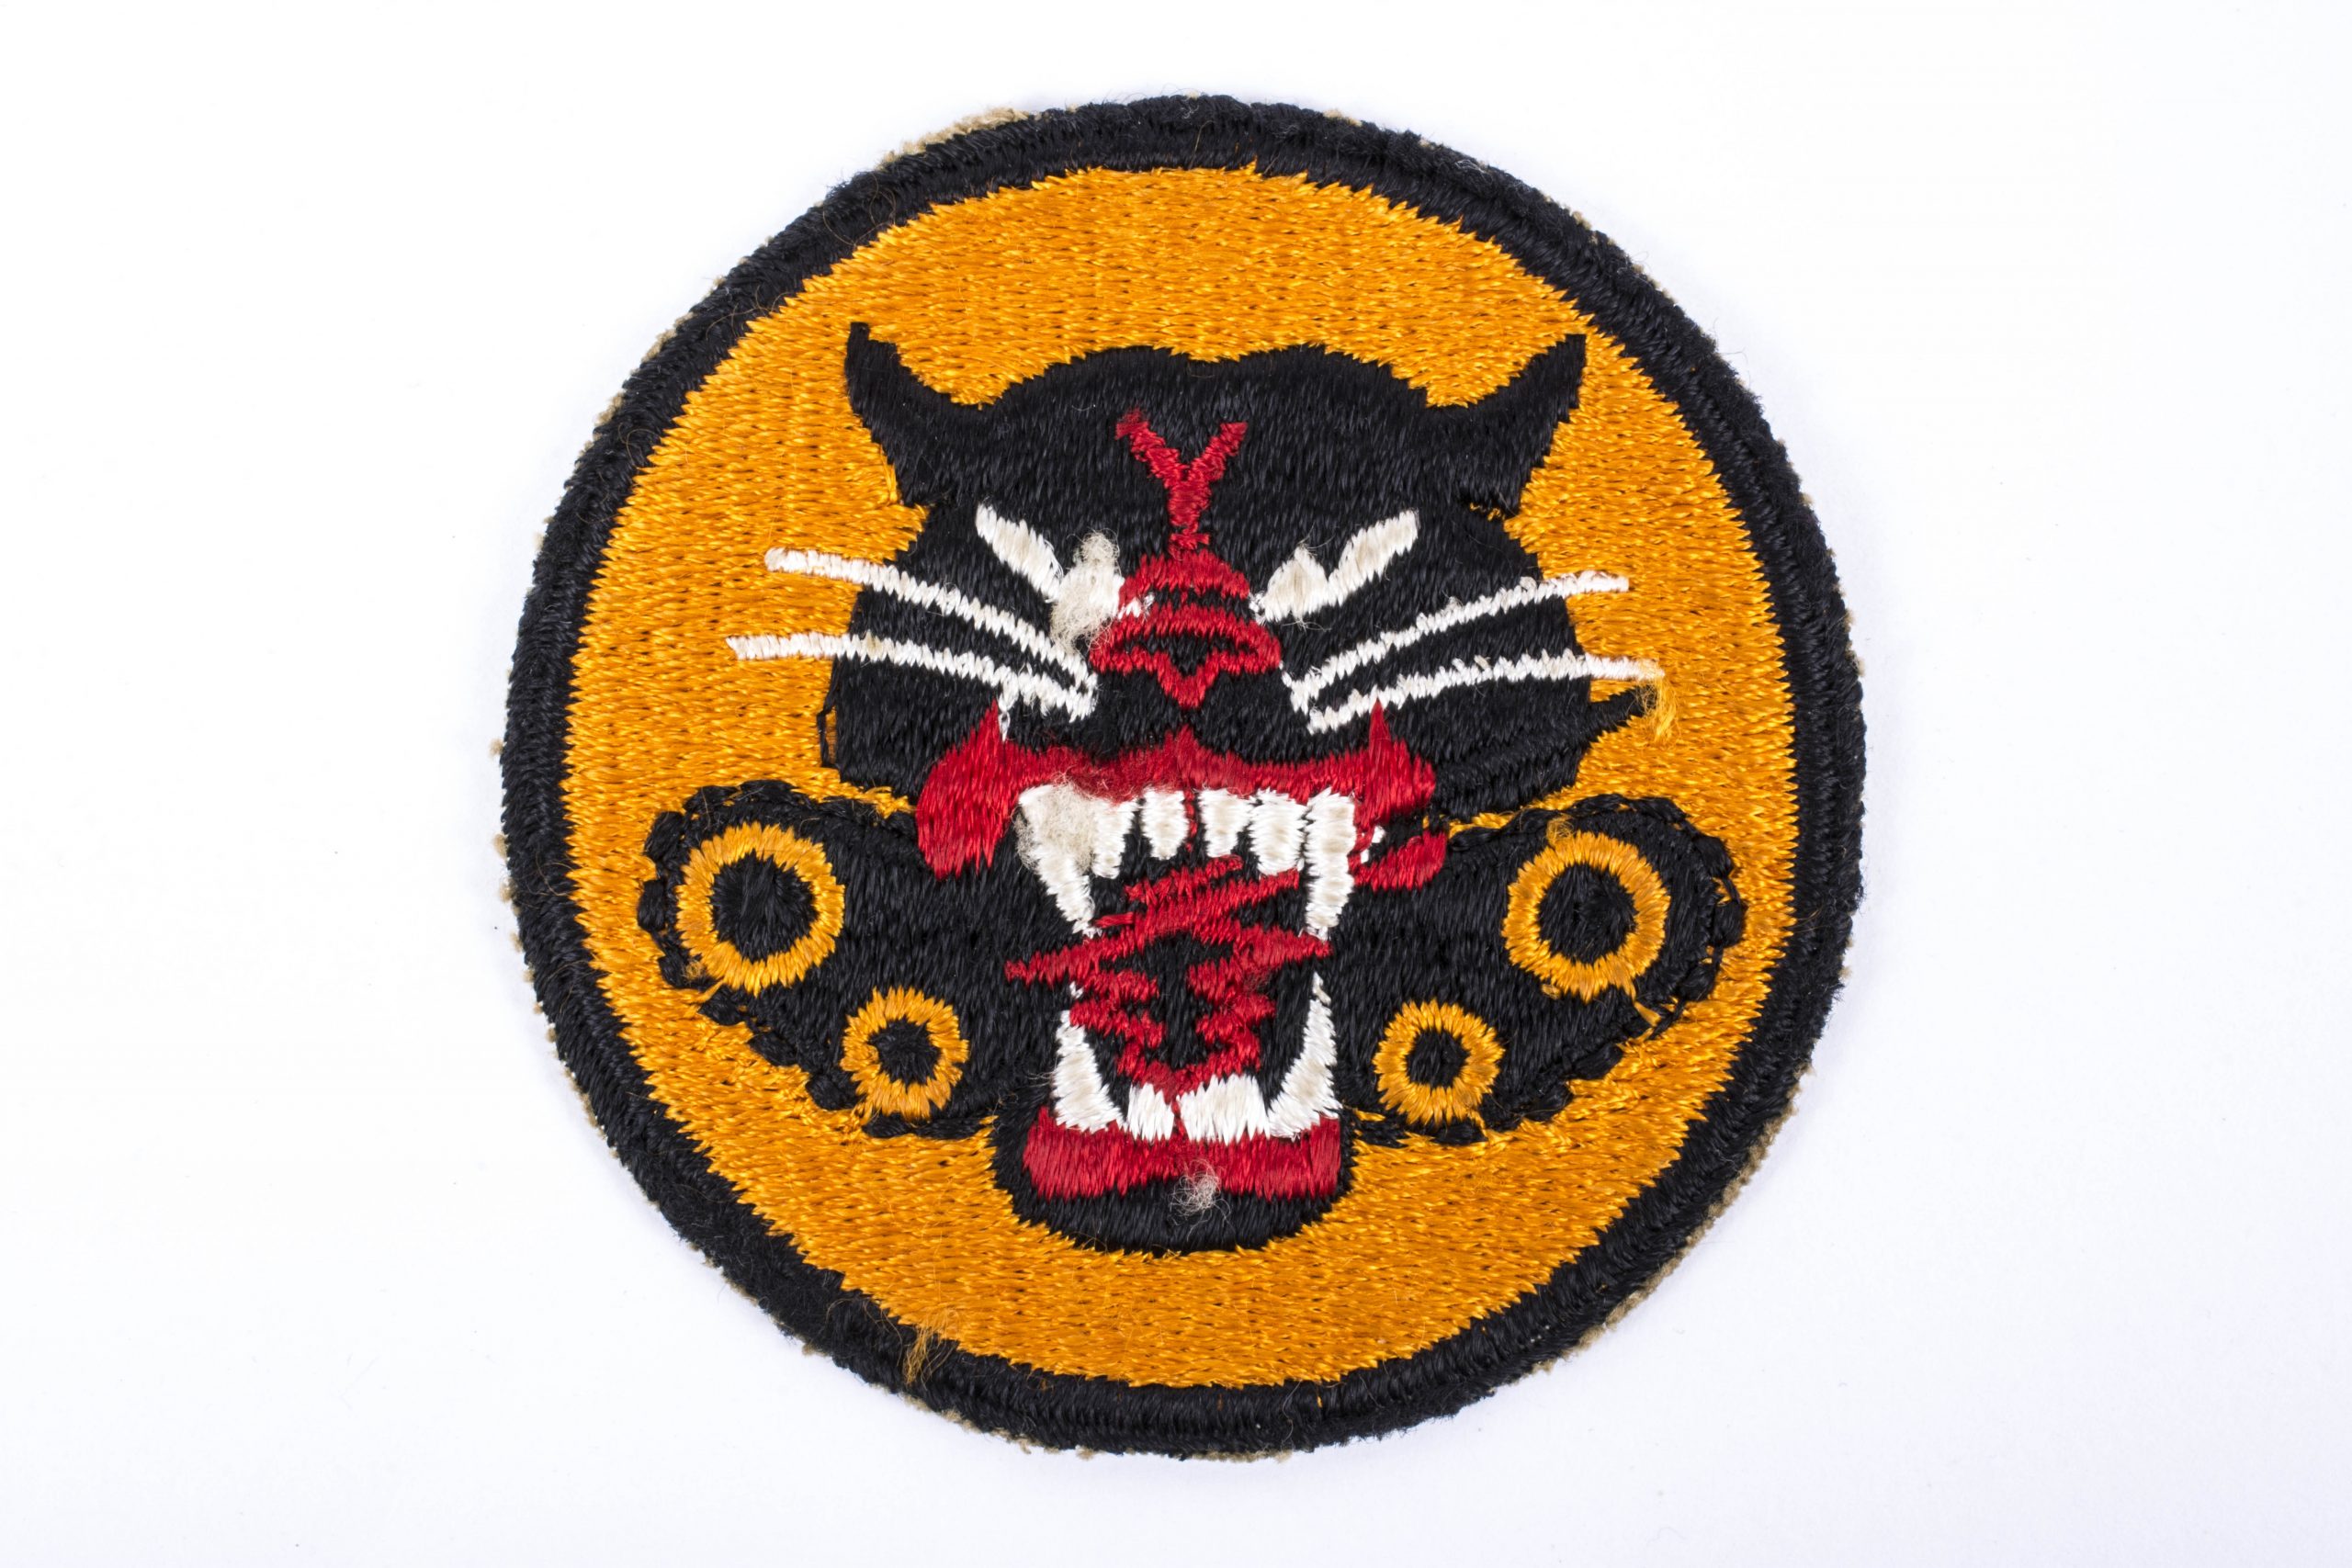 United States Tank destroyer Patch